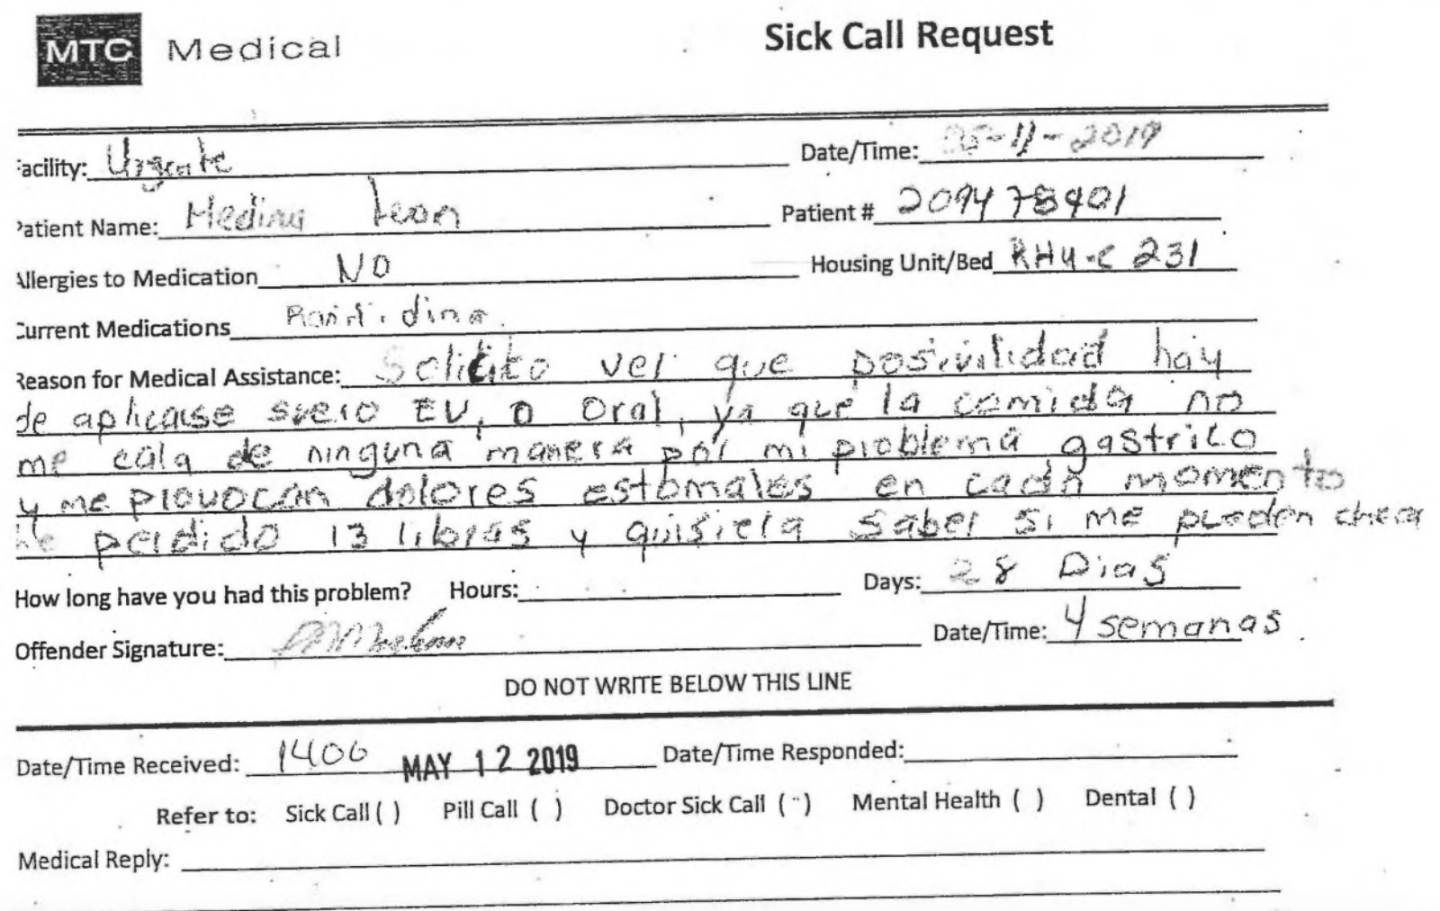 A sick call request was written by Medina Leon in Spanish on May 11, 2019.